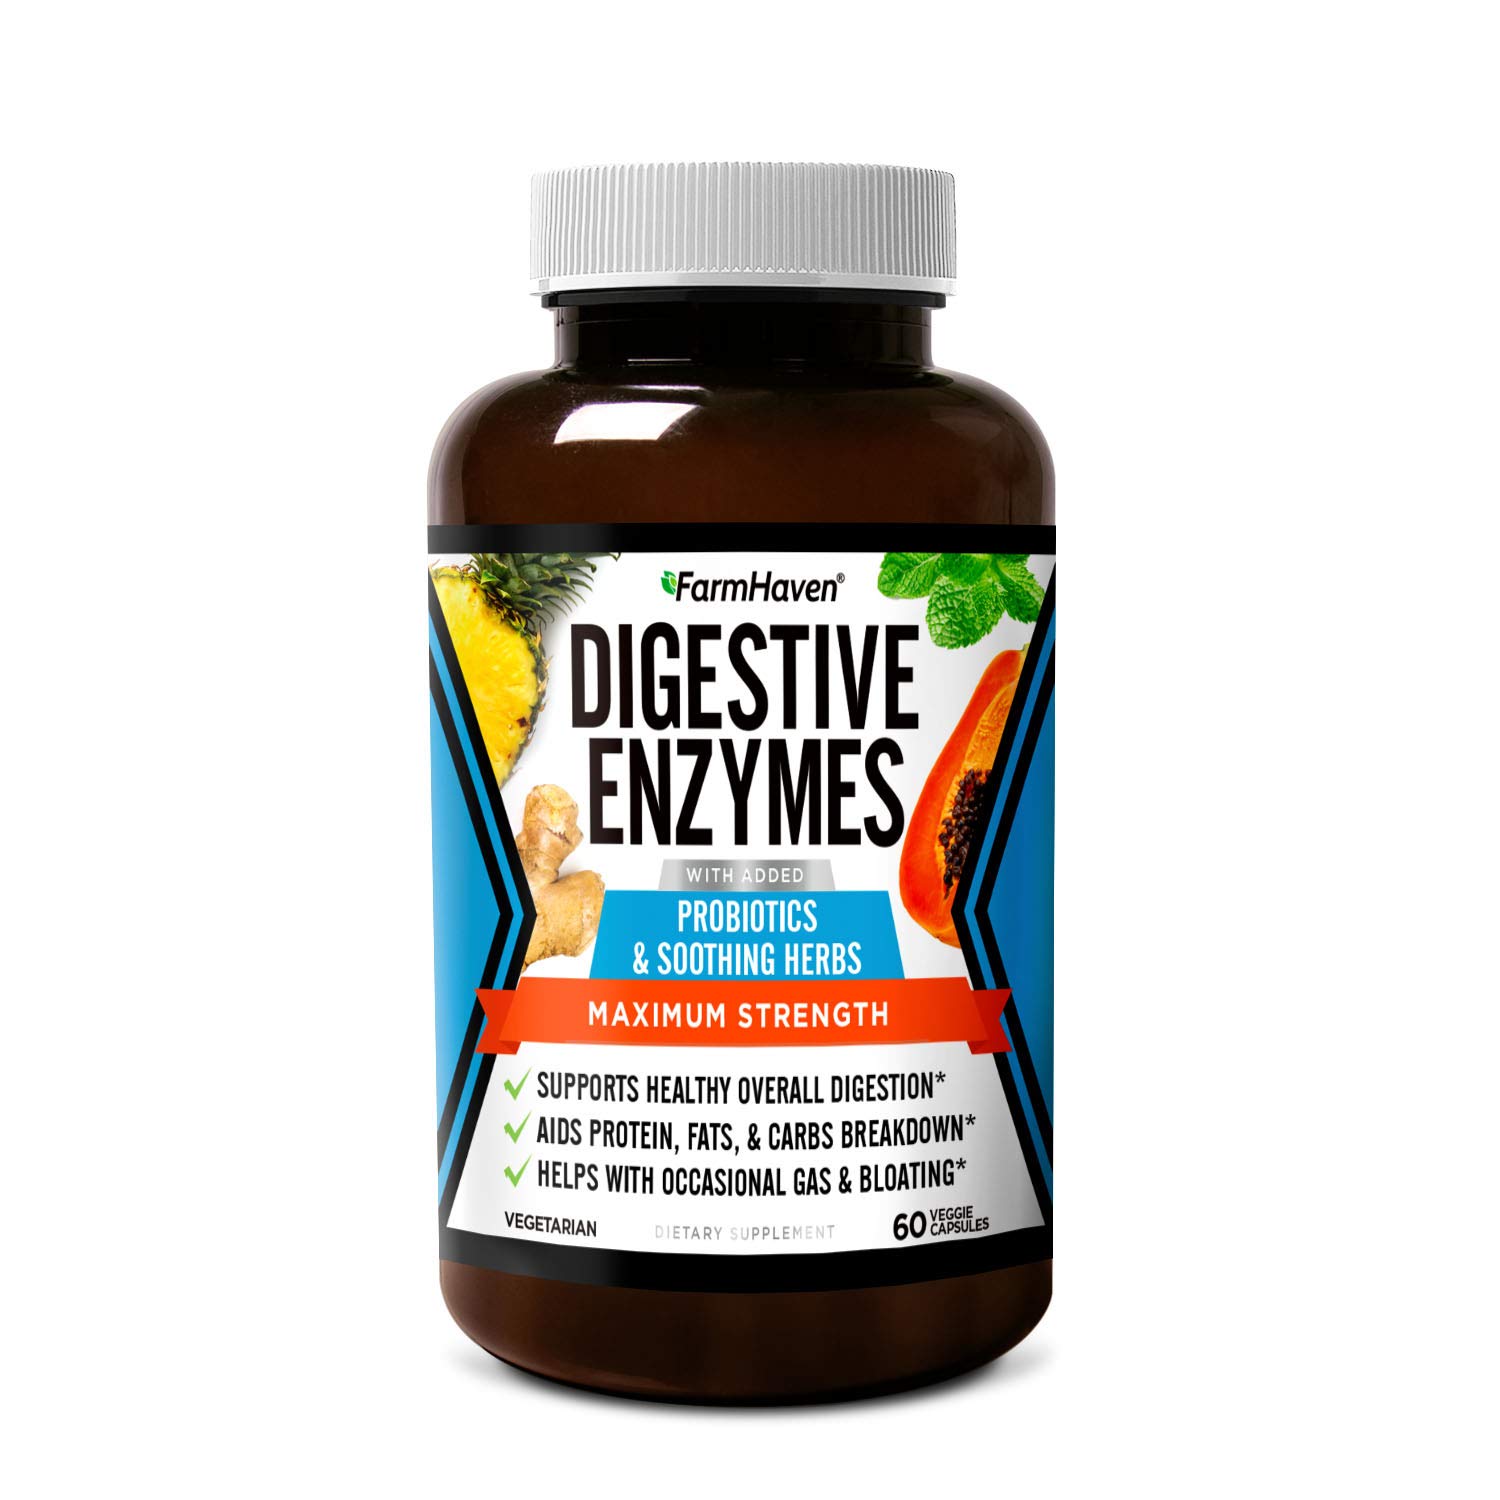 80% off Digestive Enzymes with 18 Probiotics & Herbs - $5.19 at Healthy Choices Store via Amazon